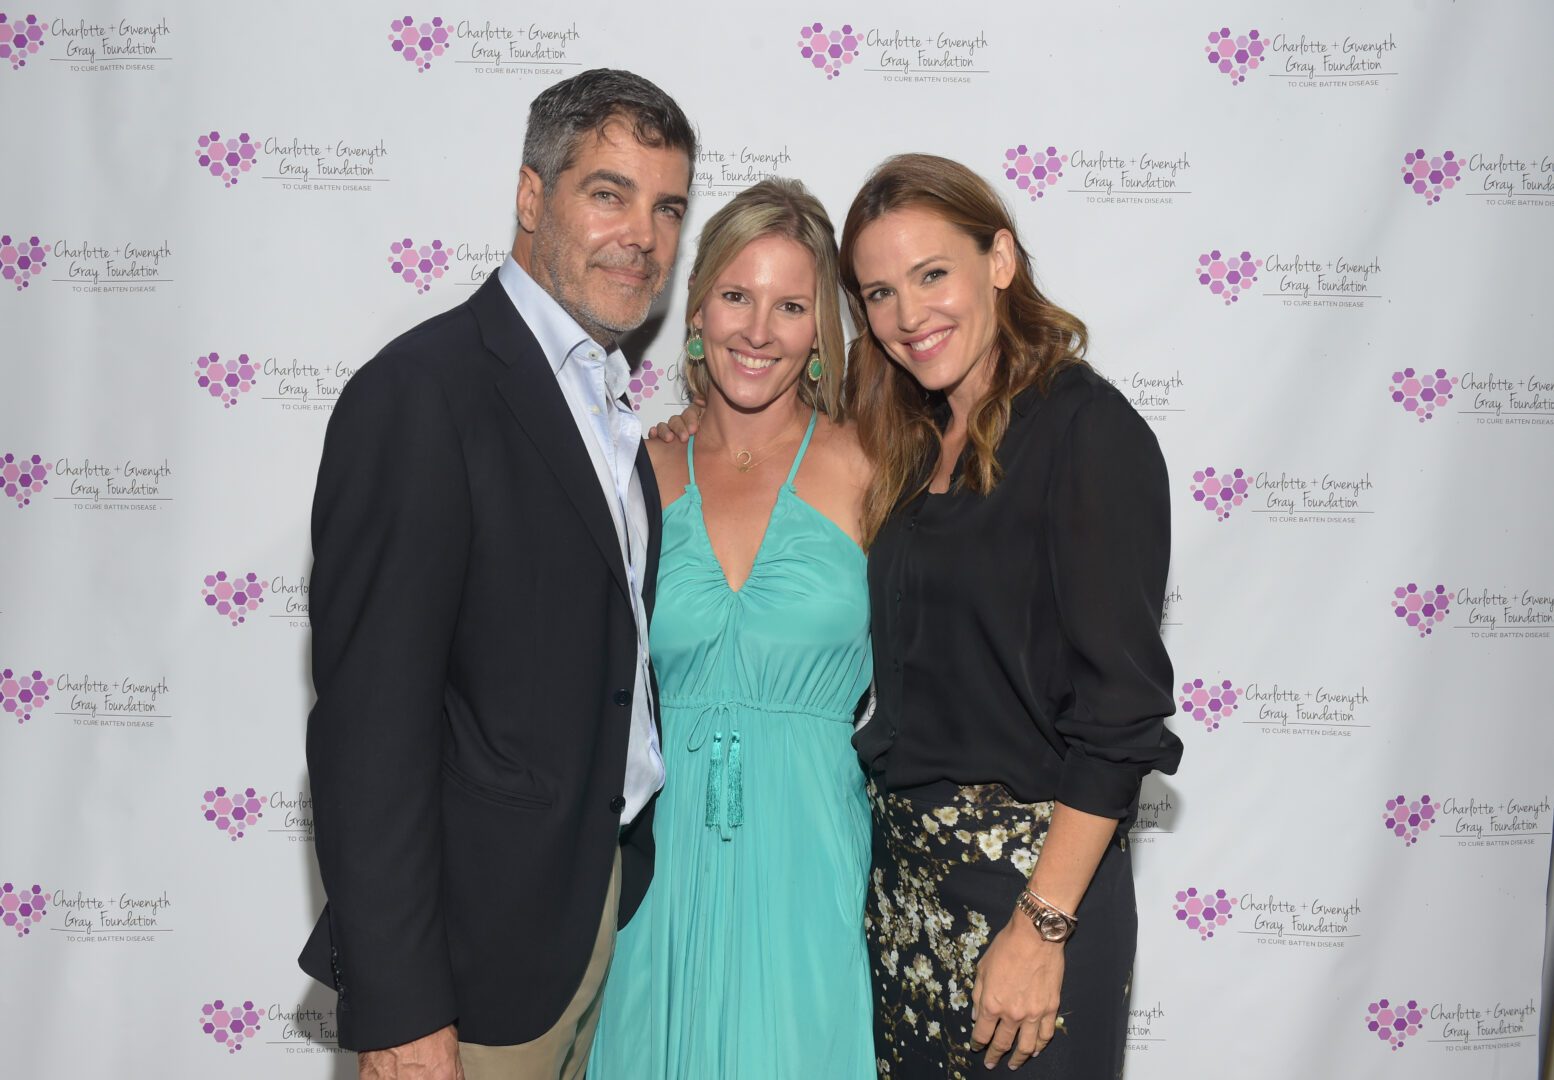 Film producer Gordon Gray, Kristen Gray, and actress/host Jennifer Garner attend The Charlotte And Gwenyth Gray Foundation To Cure Batten Disease Fundraiser